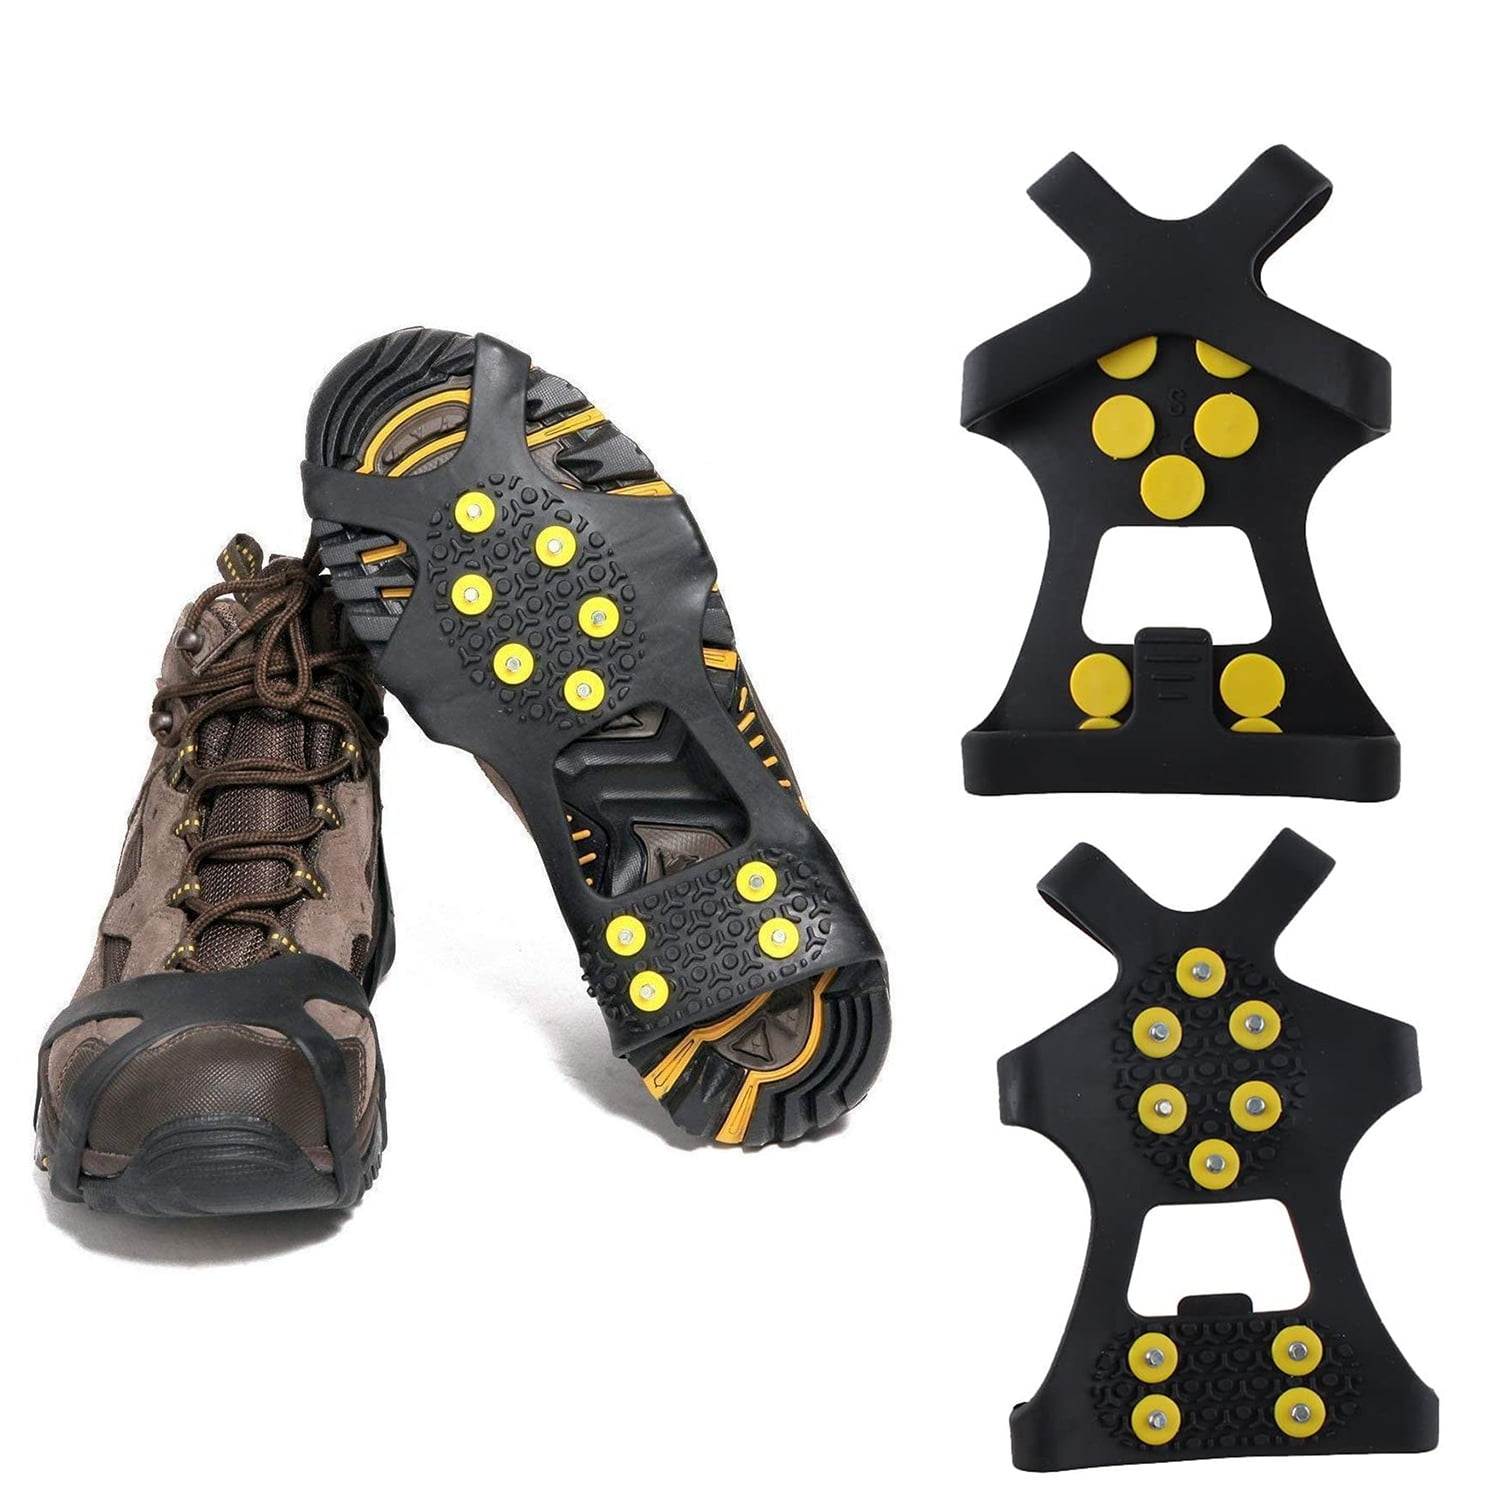 Ice Snow Anti Slip Spikes Grips Grippers Crampon Cleats For Shoes Boot Overshoe 